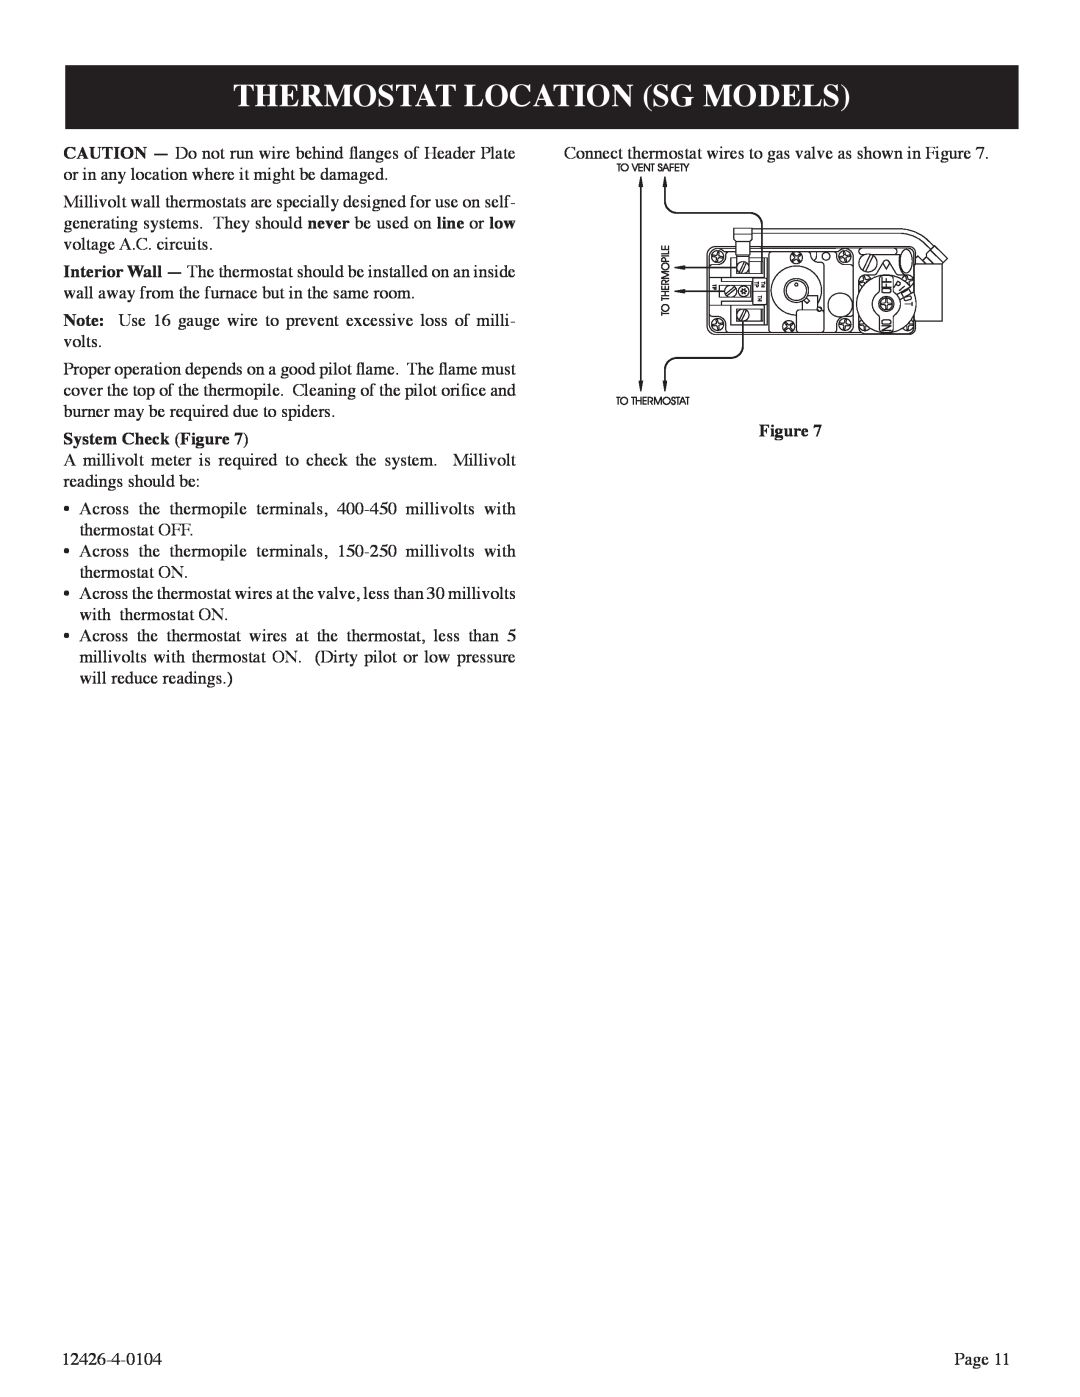 Empire Comfort Systems RB), GWT-50-2 installation instructions Thermostat Location Sg Models, System Check Figure 